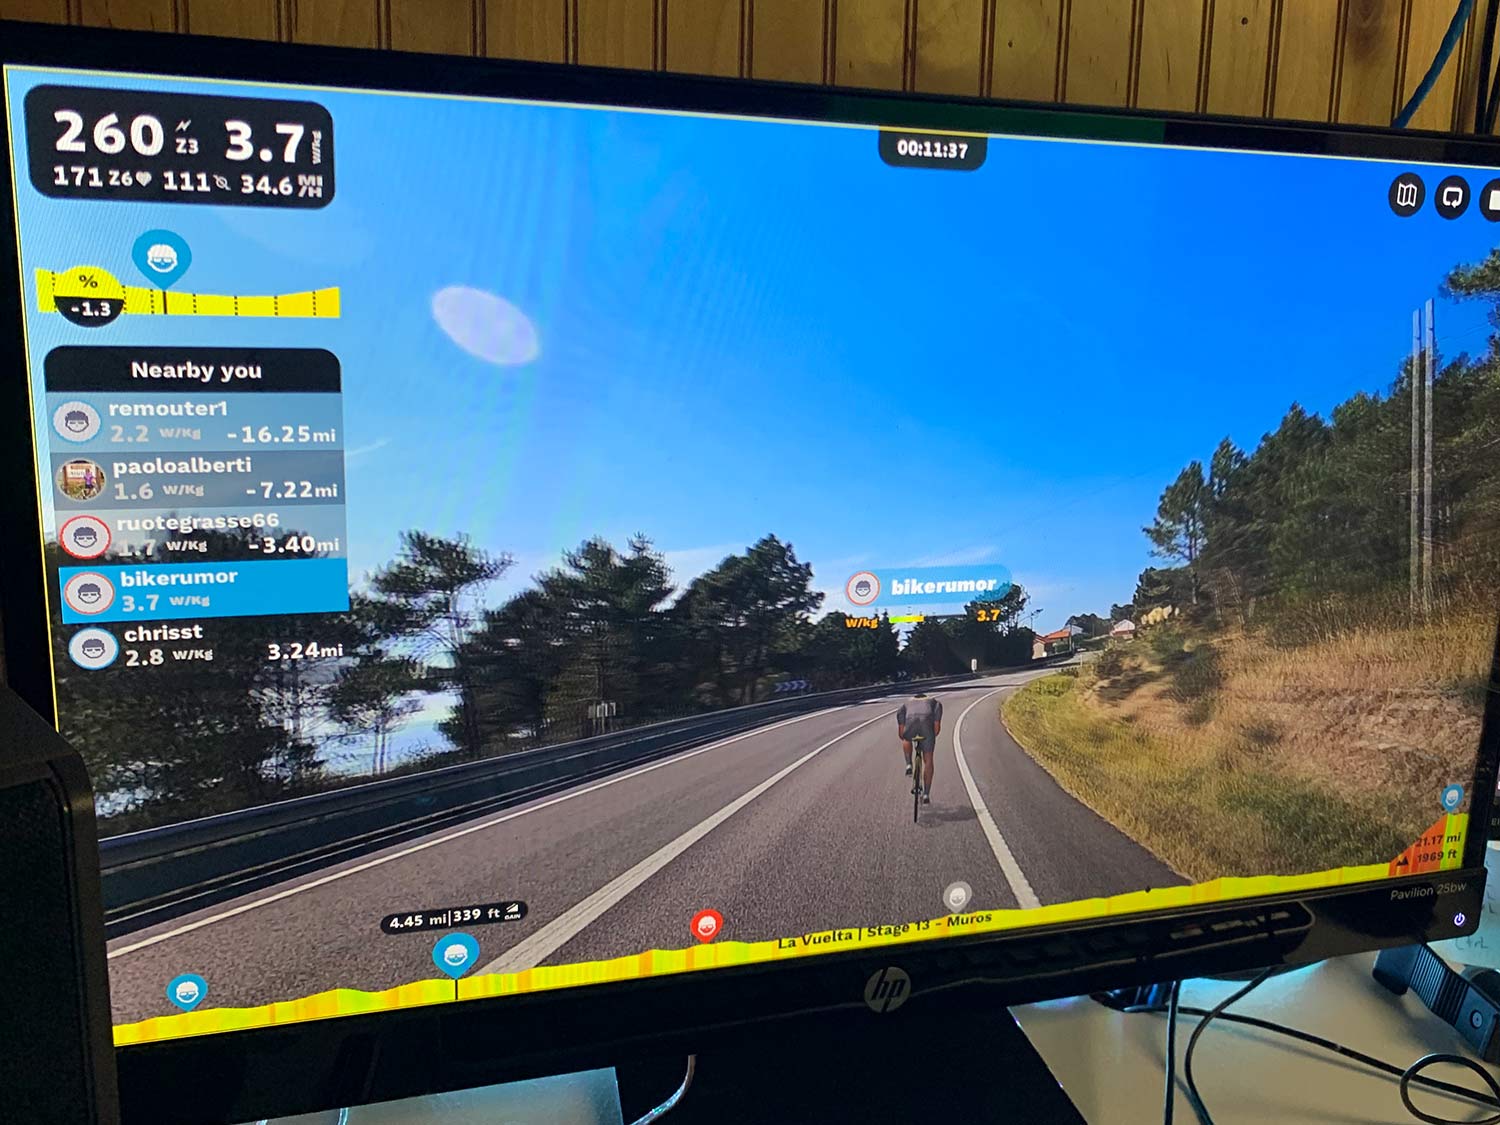 rouvy indoor virtual cycling training app screenshot showing rider stats and position